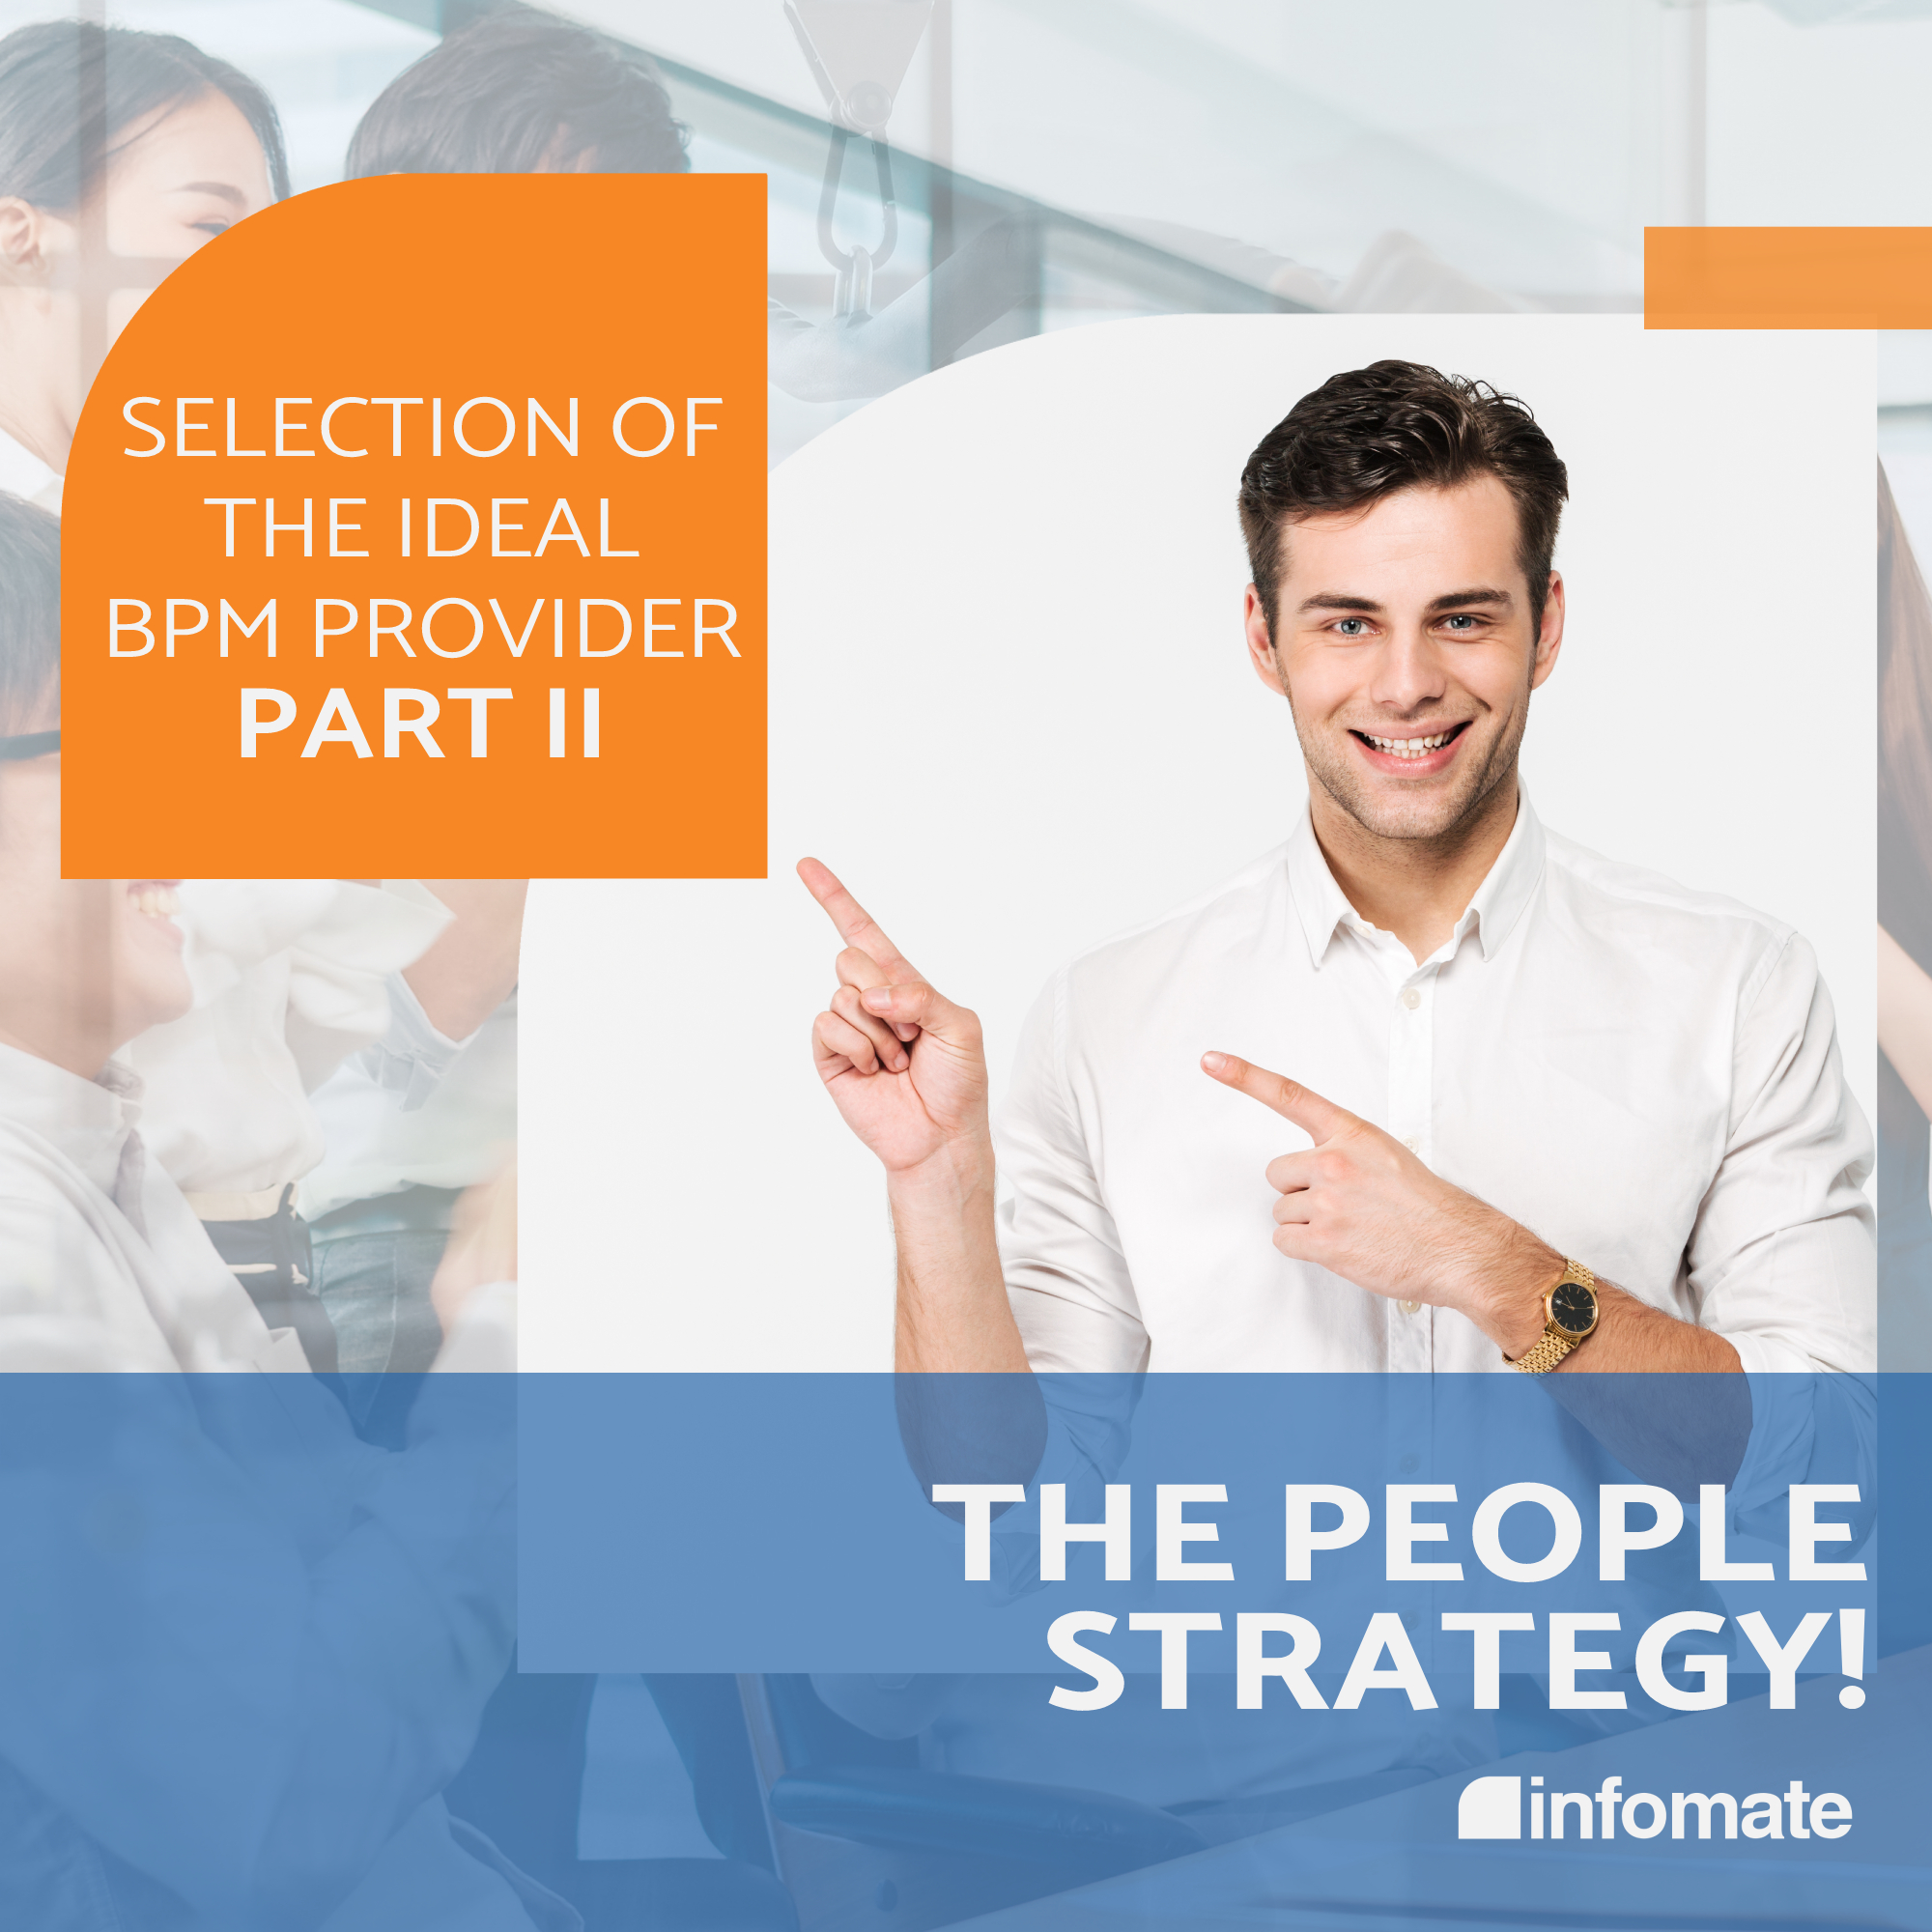 Selection of the ideal BPM provider Part II – the people strategy!